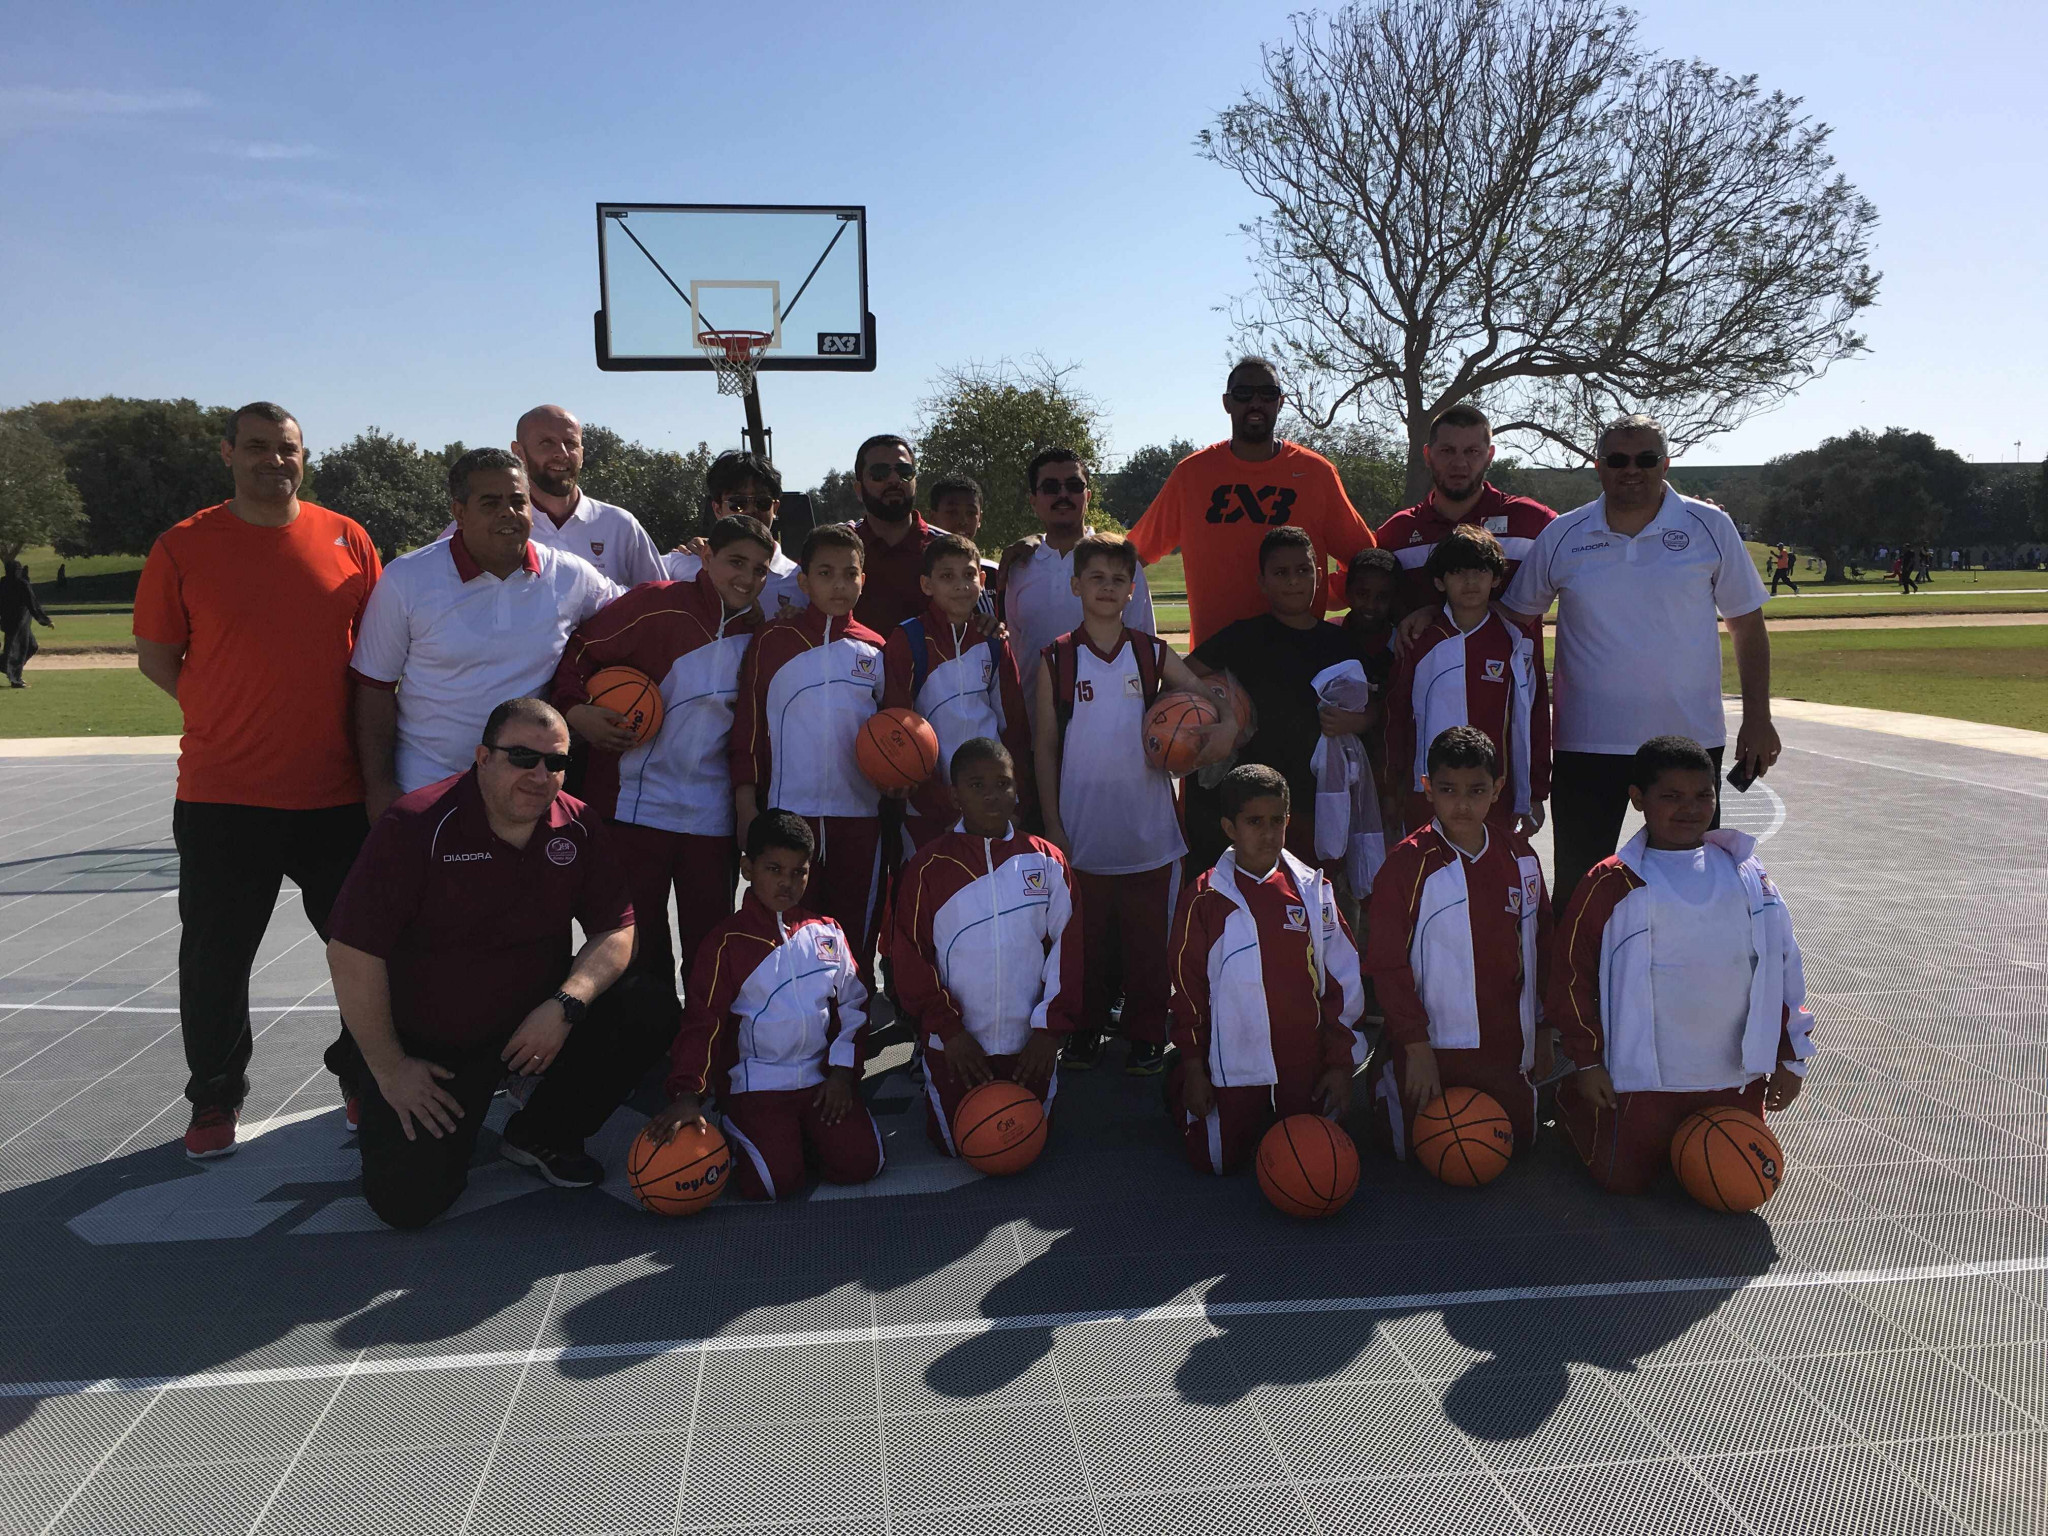 Basketball was one of many sports on offer on National Sport Day ©QOC